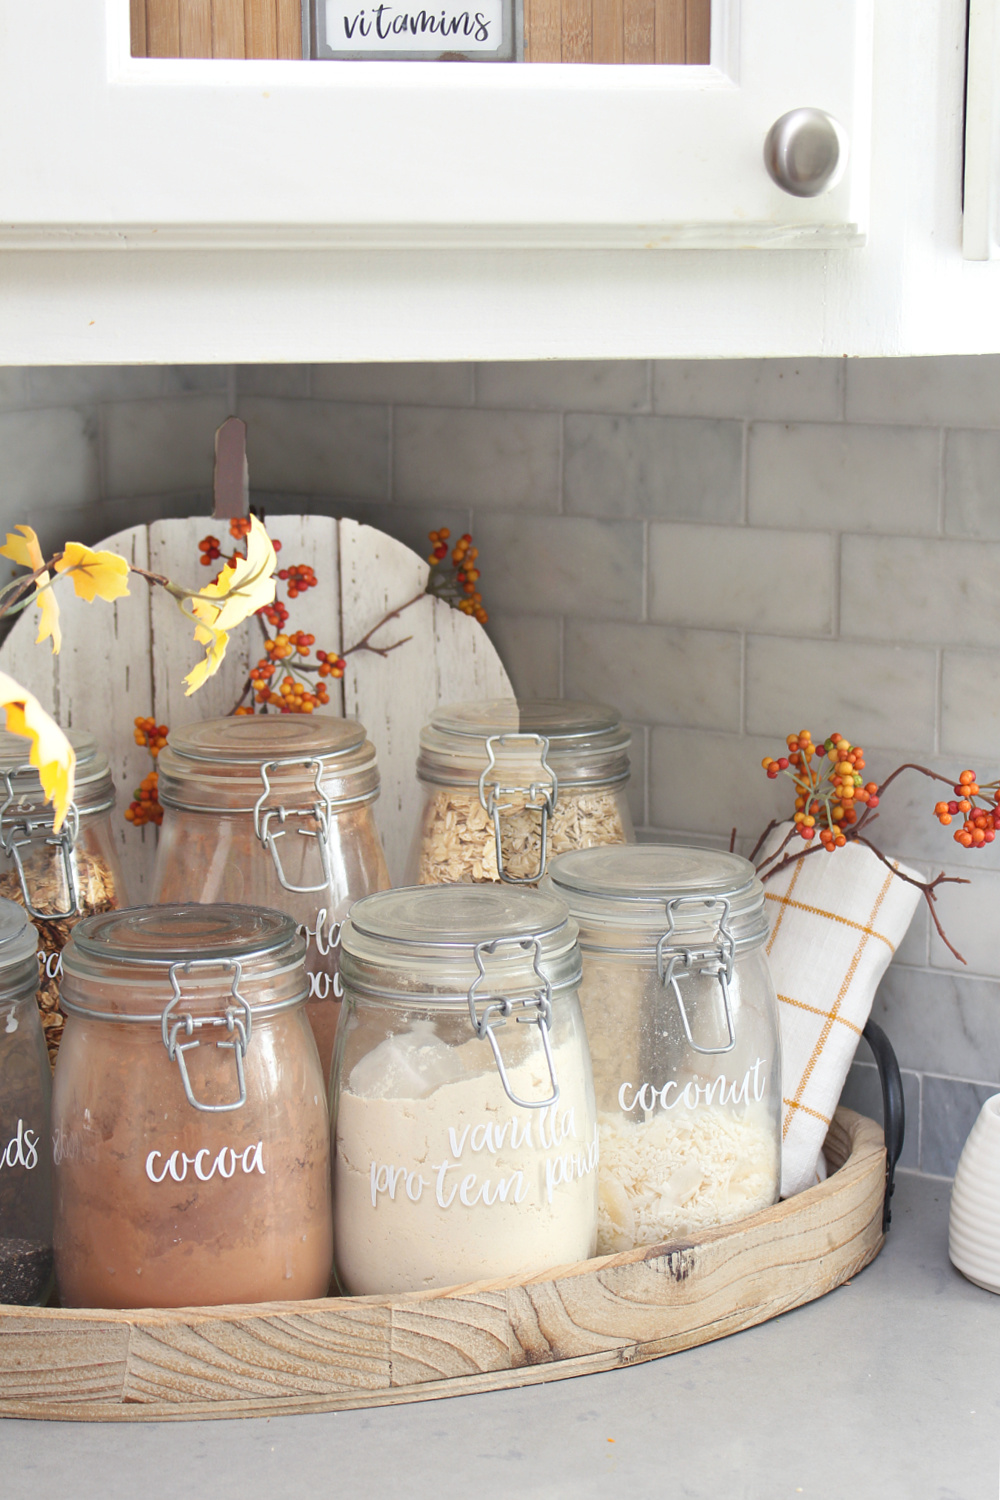 Kitchen smoothie bar with glass jars decorated for fall.